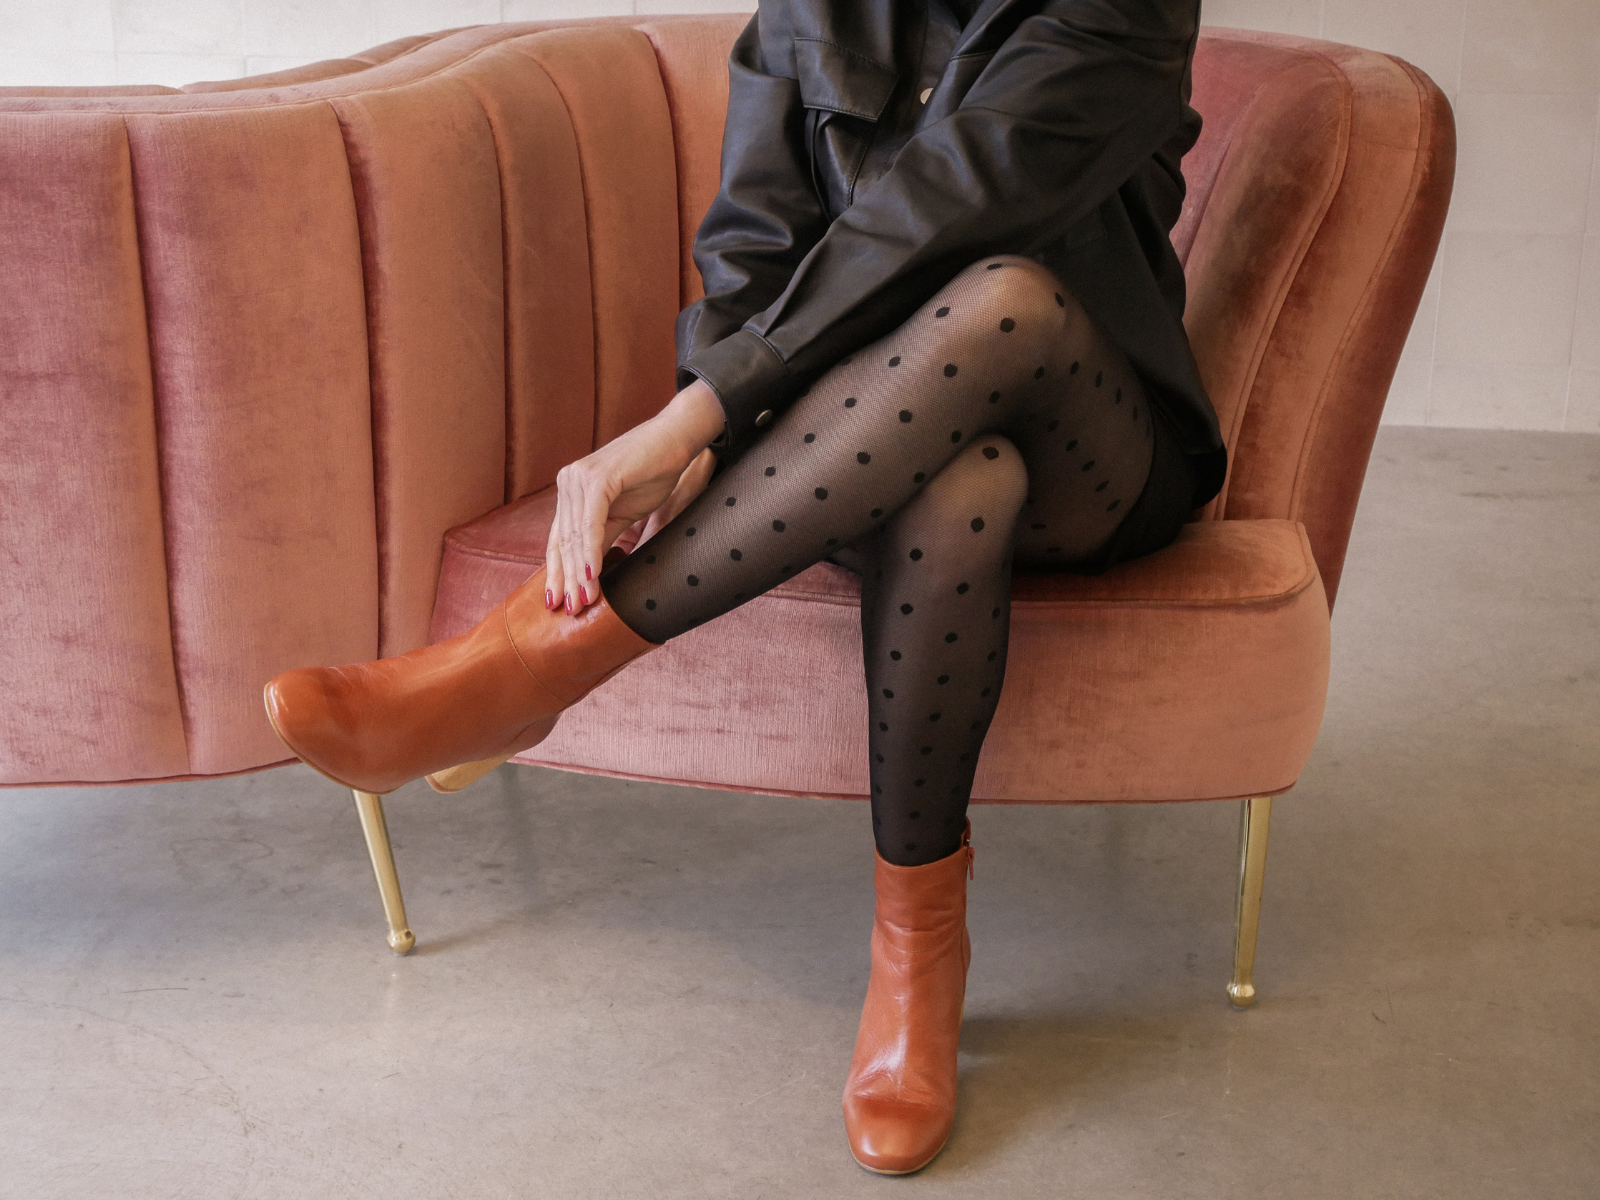 5 Mistakes We All Make When Putting on Tights – From Rachel